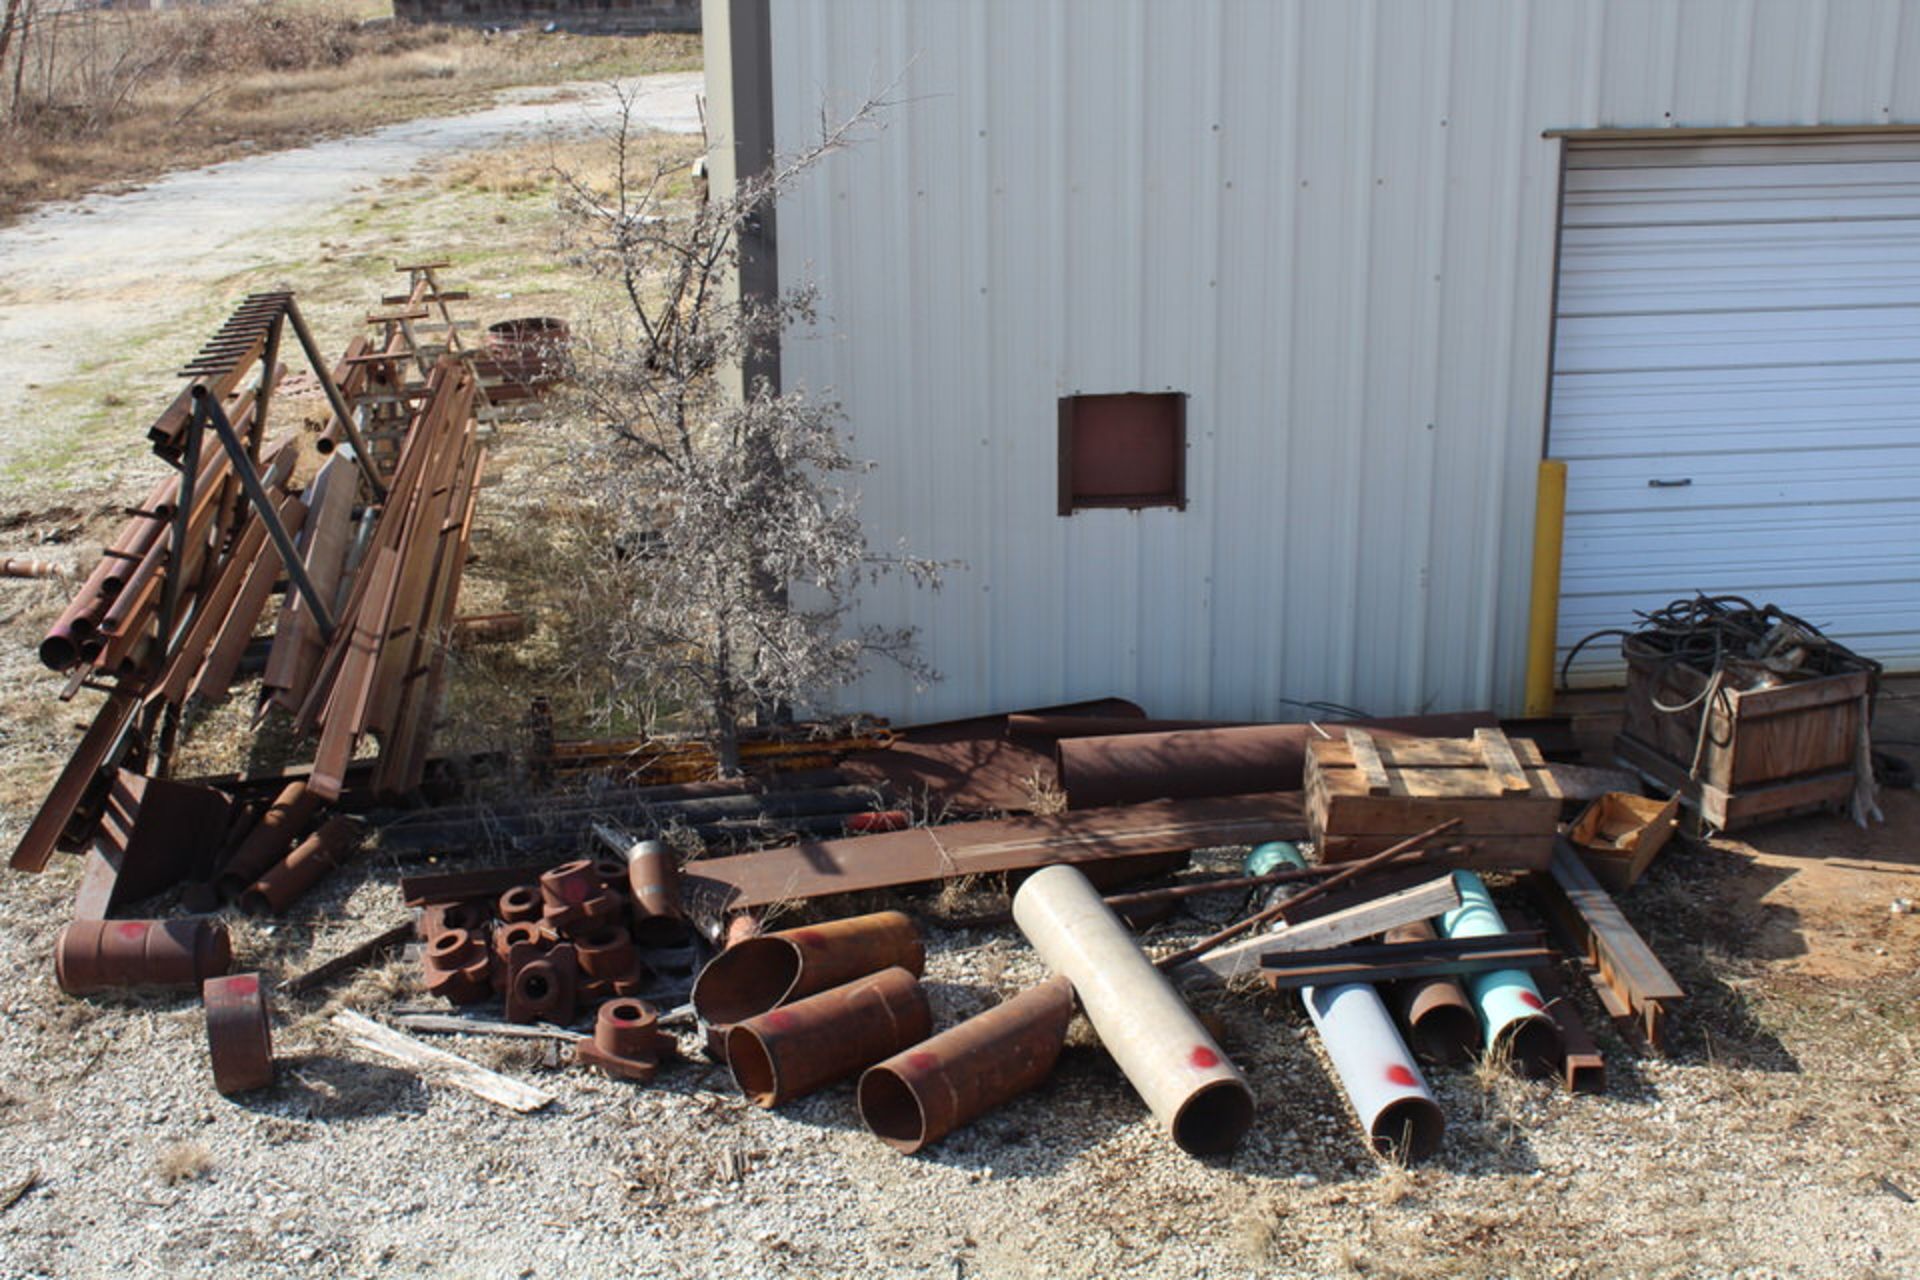 ALL SCRAP CONT IN YARD, SOUTH SIDE, RED DOT - Image 3 of 3